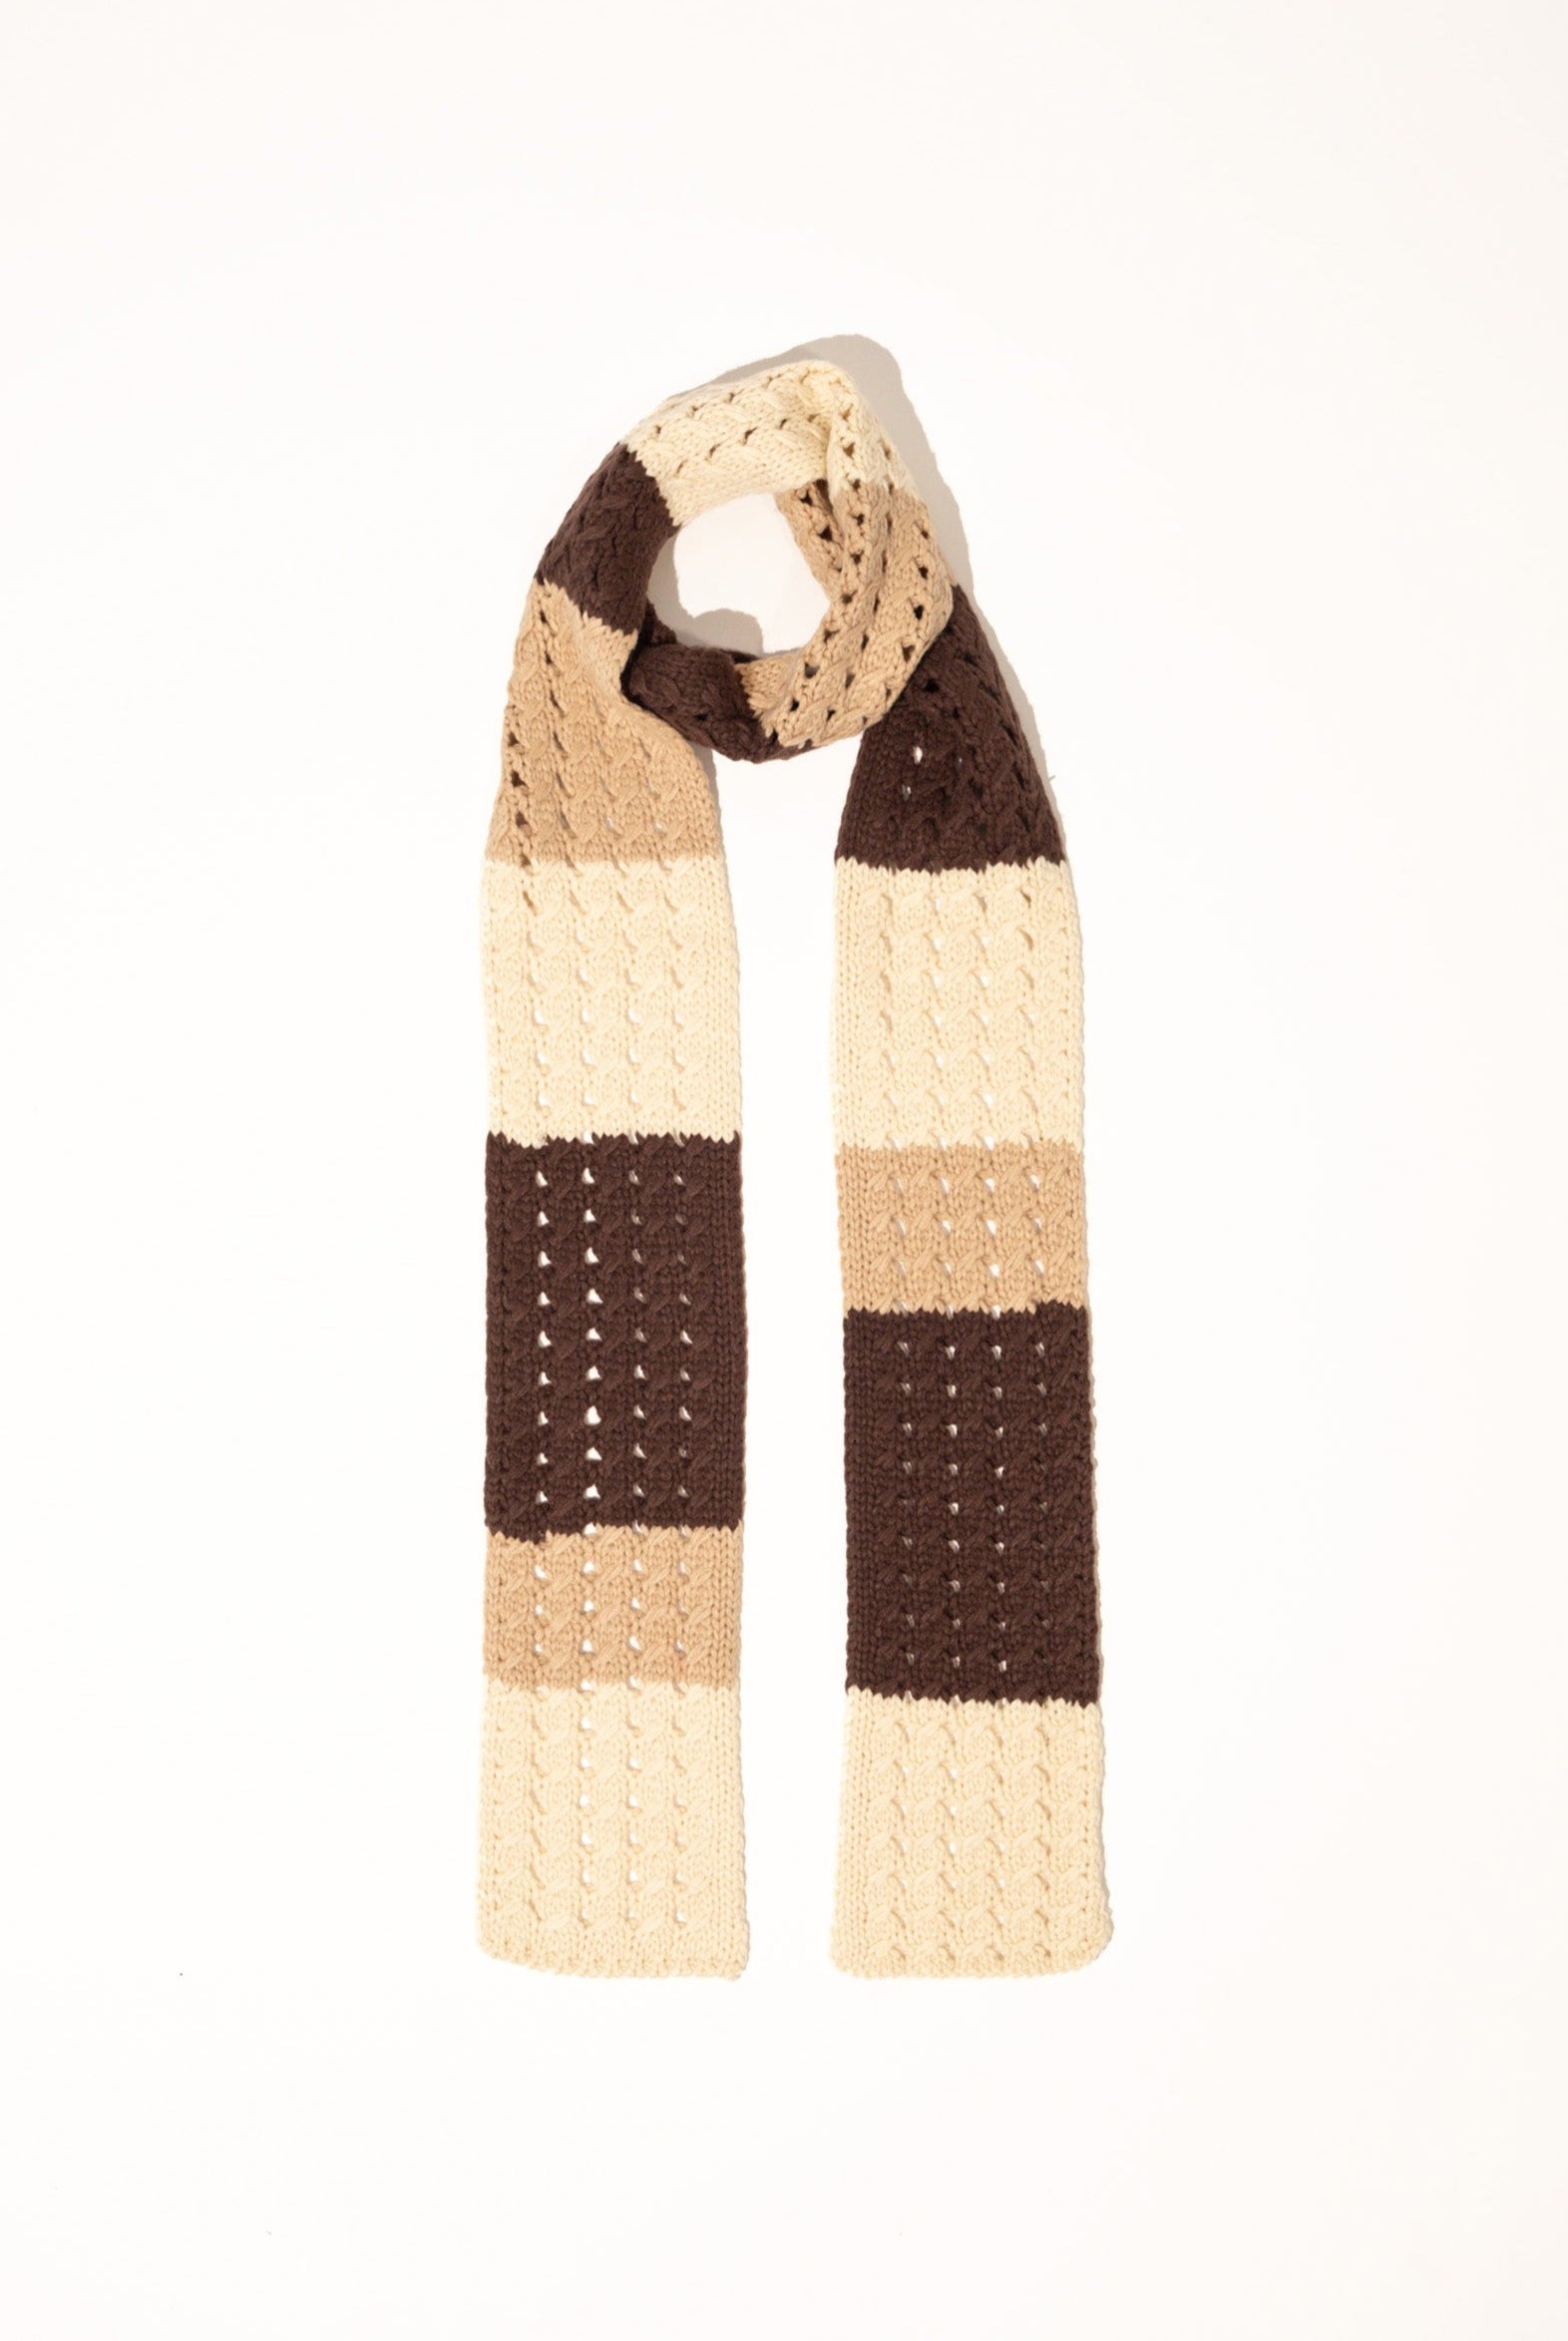 Striped Skinny Crochet Knit Scarf in Brown | Knitwear | Crochet Accessories | Crochet | Granny Square | Patchwork | Striped Scarf | Plaza Core | Weird Girl | 90s | Rachel Green | Women | Winter accessories | Autumn Accessories | fall Accessories | Accessories | Accessory | Streetwear | Streetstyle | Craftcore | Arty | Indie | Elevated Indie |